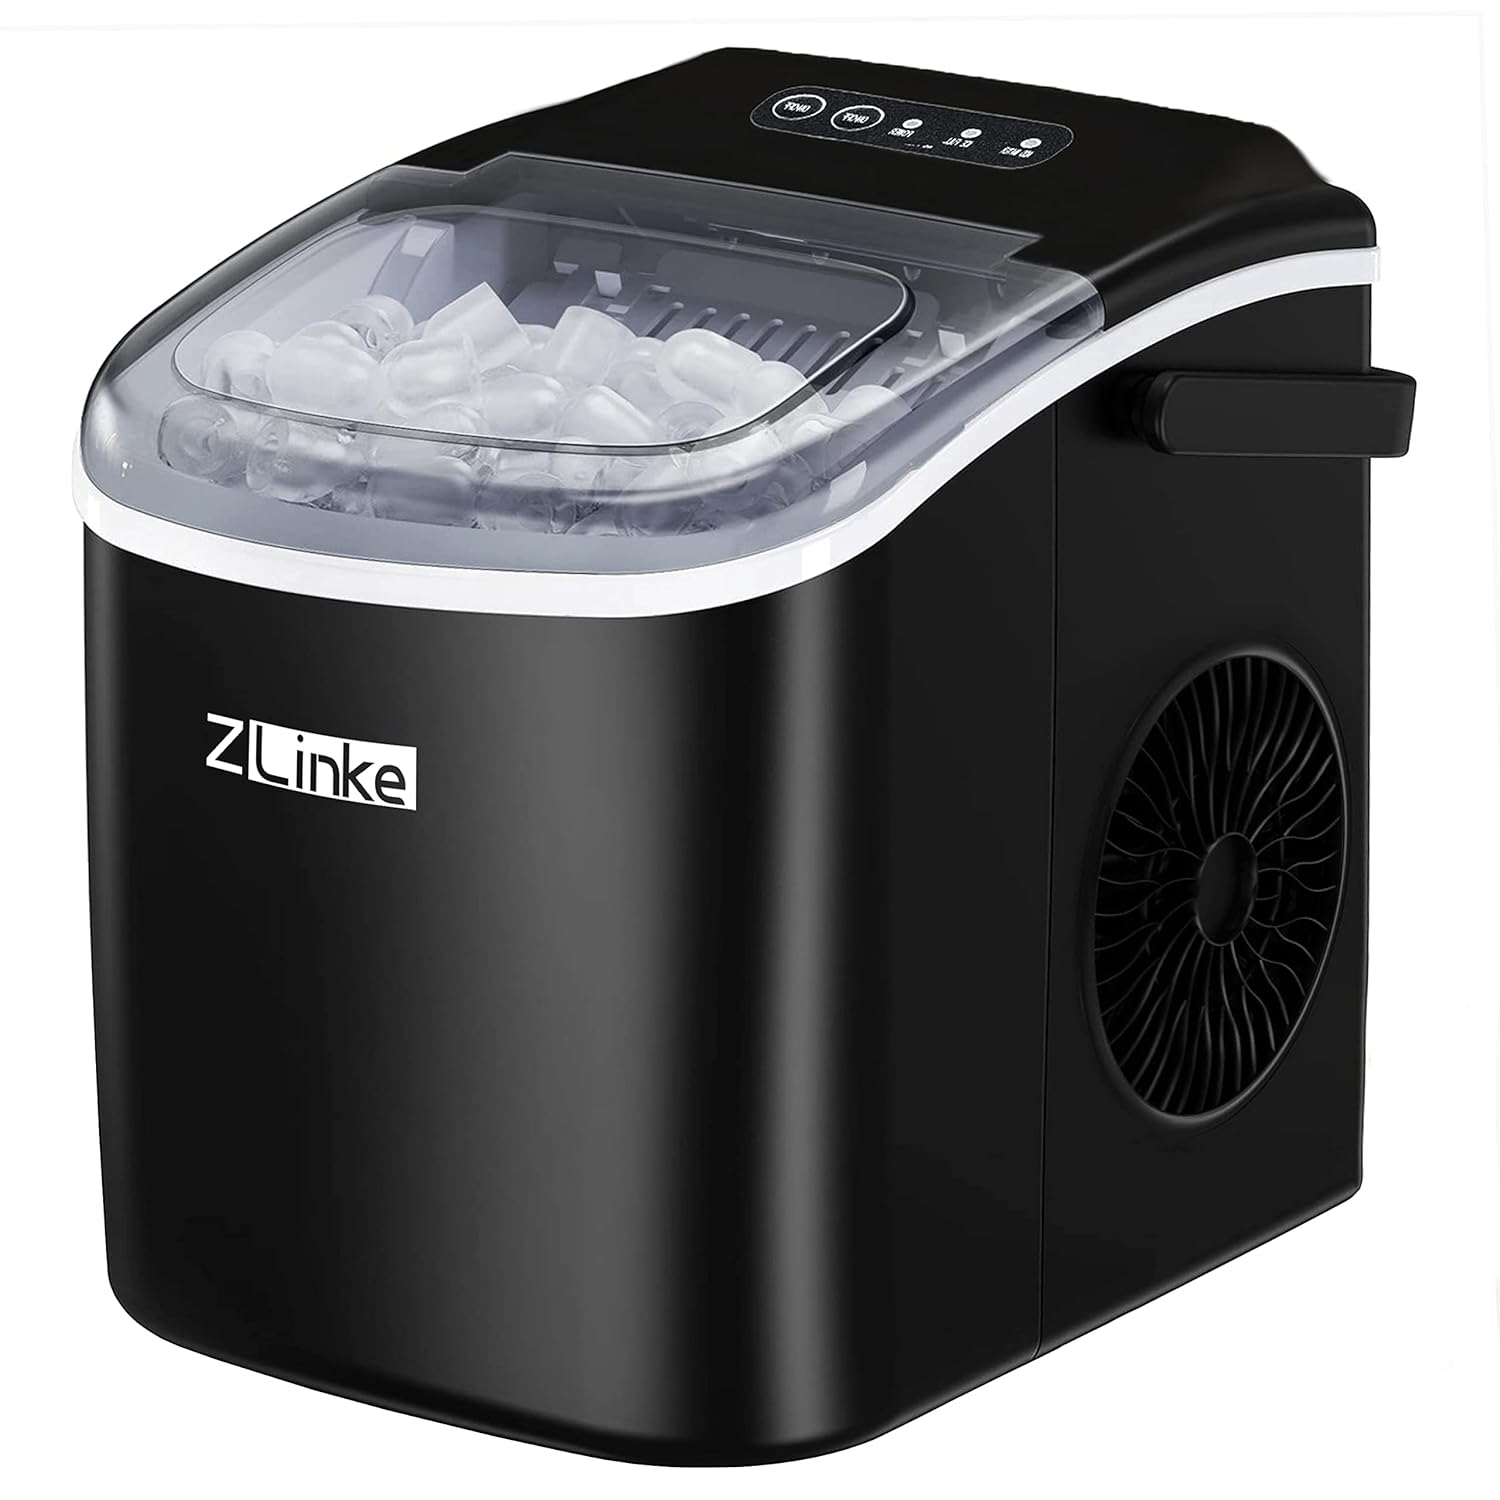 Portable Ice Maker Machine Review